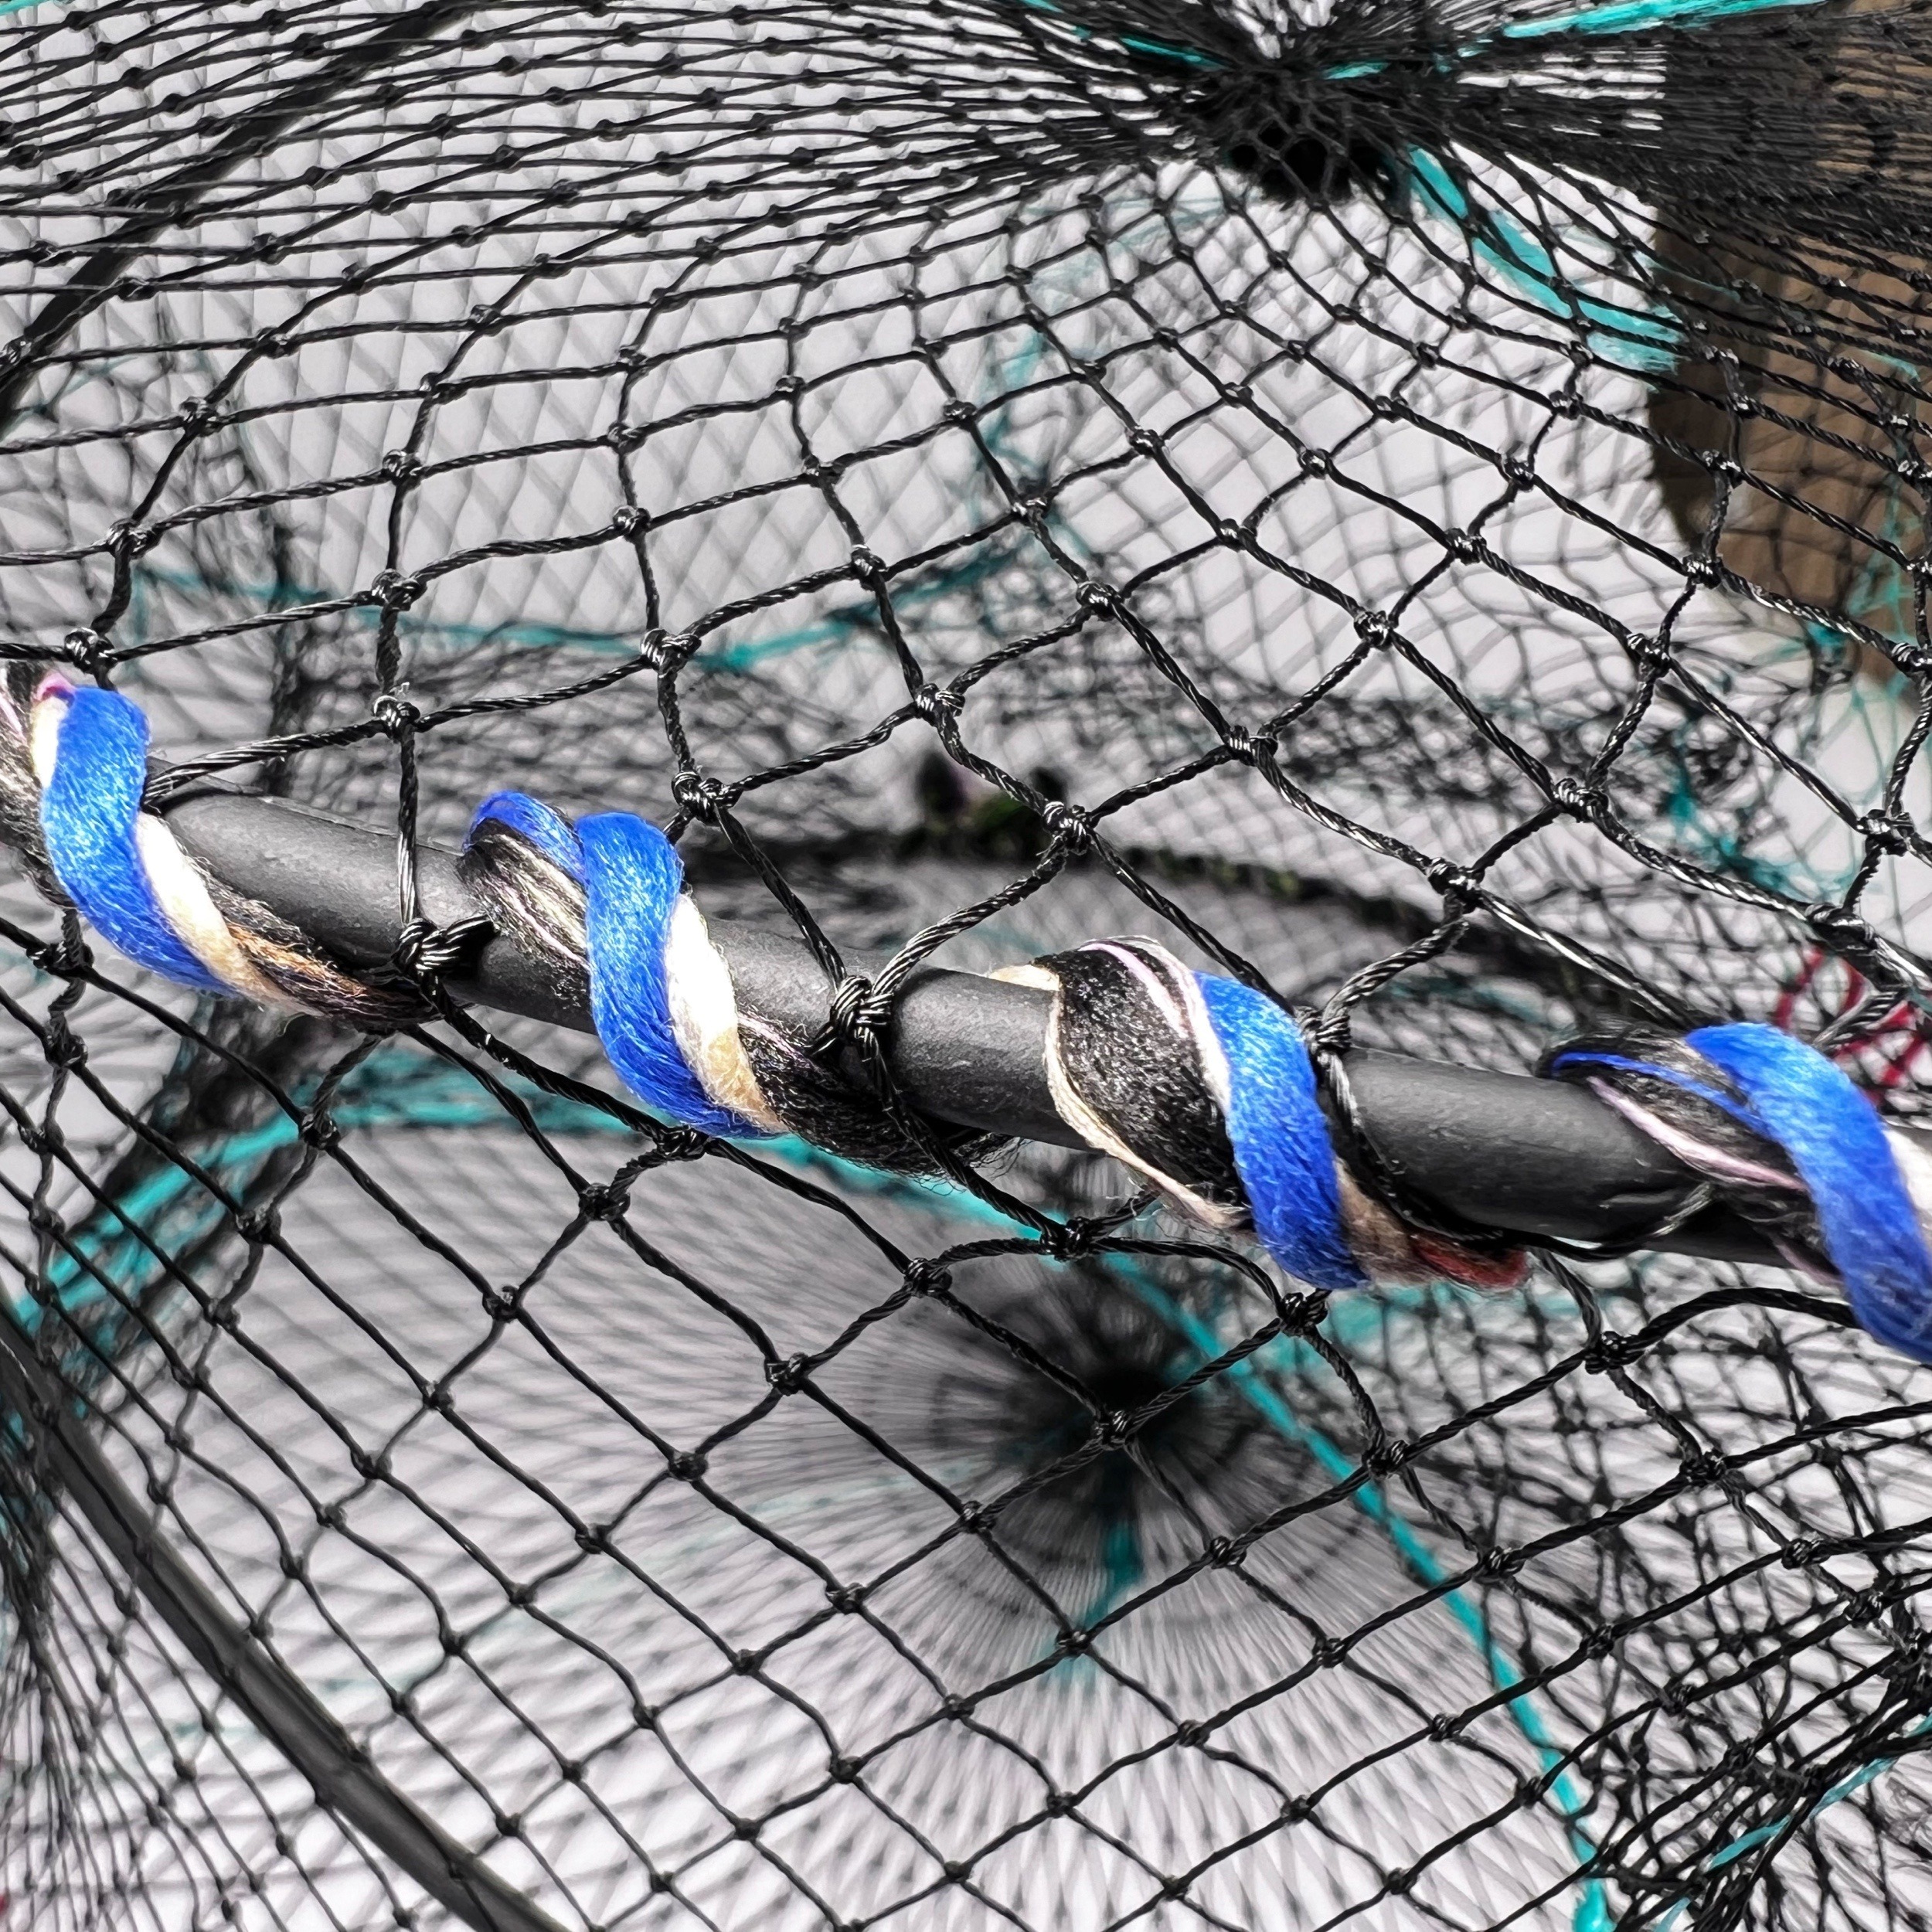 Foldable Fishing Net: Portable Trap For Shrimp, Lobster, Crab, Eel & Fish -  Outdoor Fishing Equipment